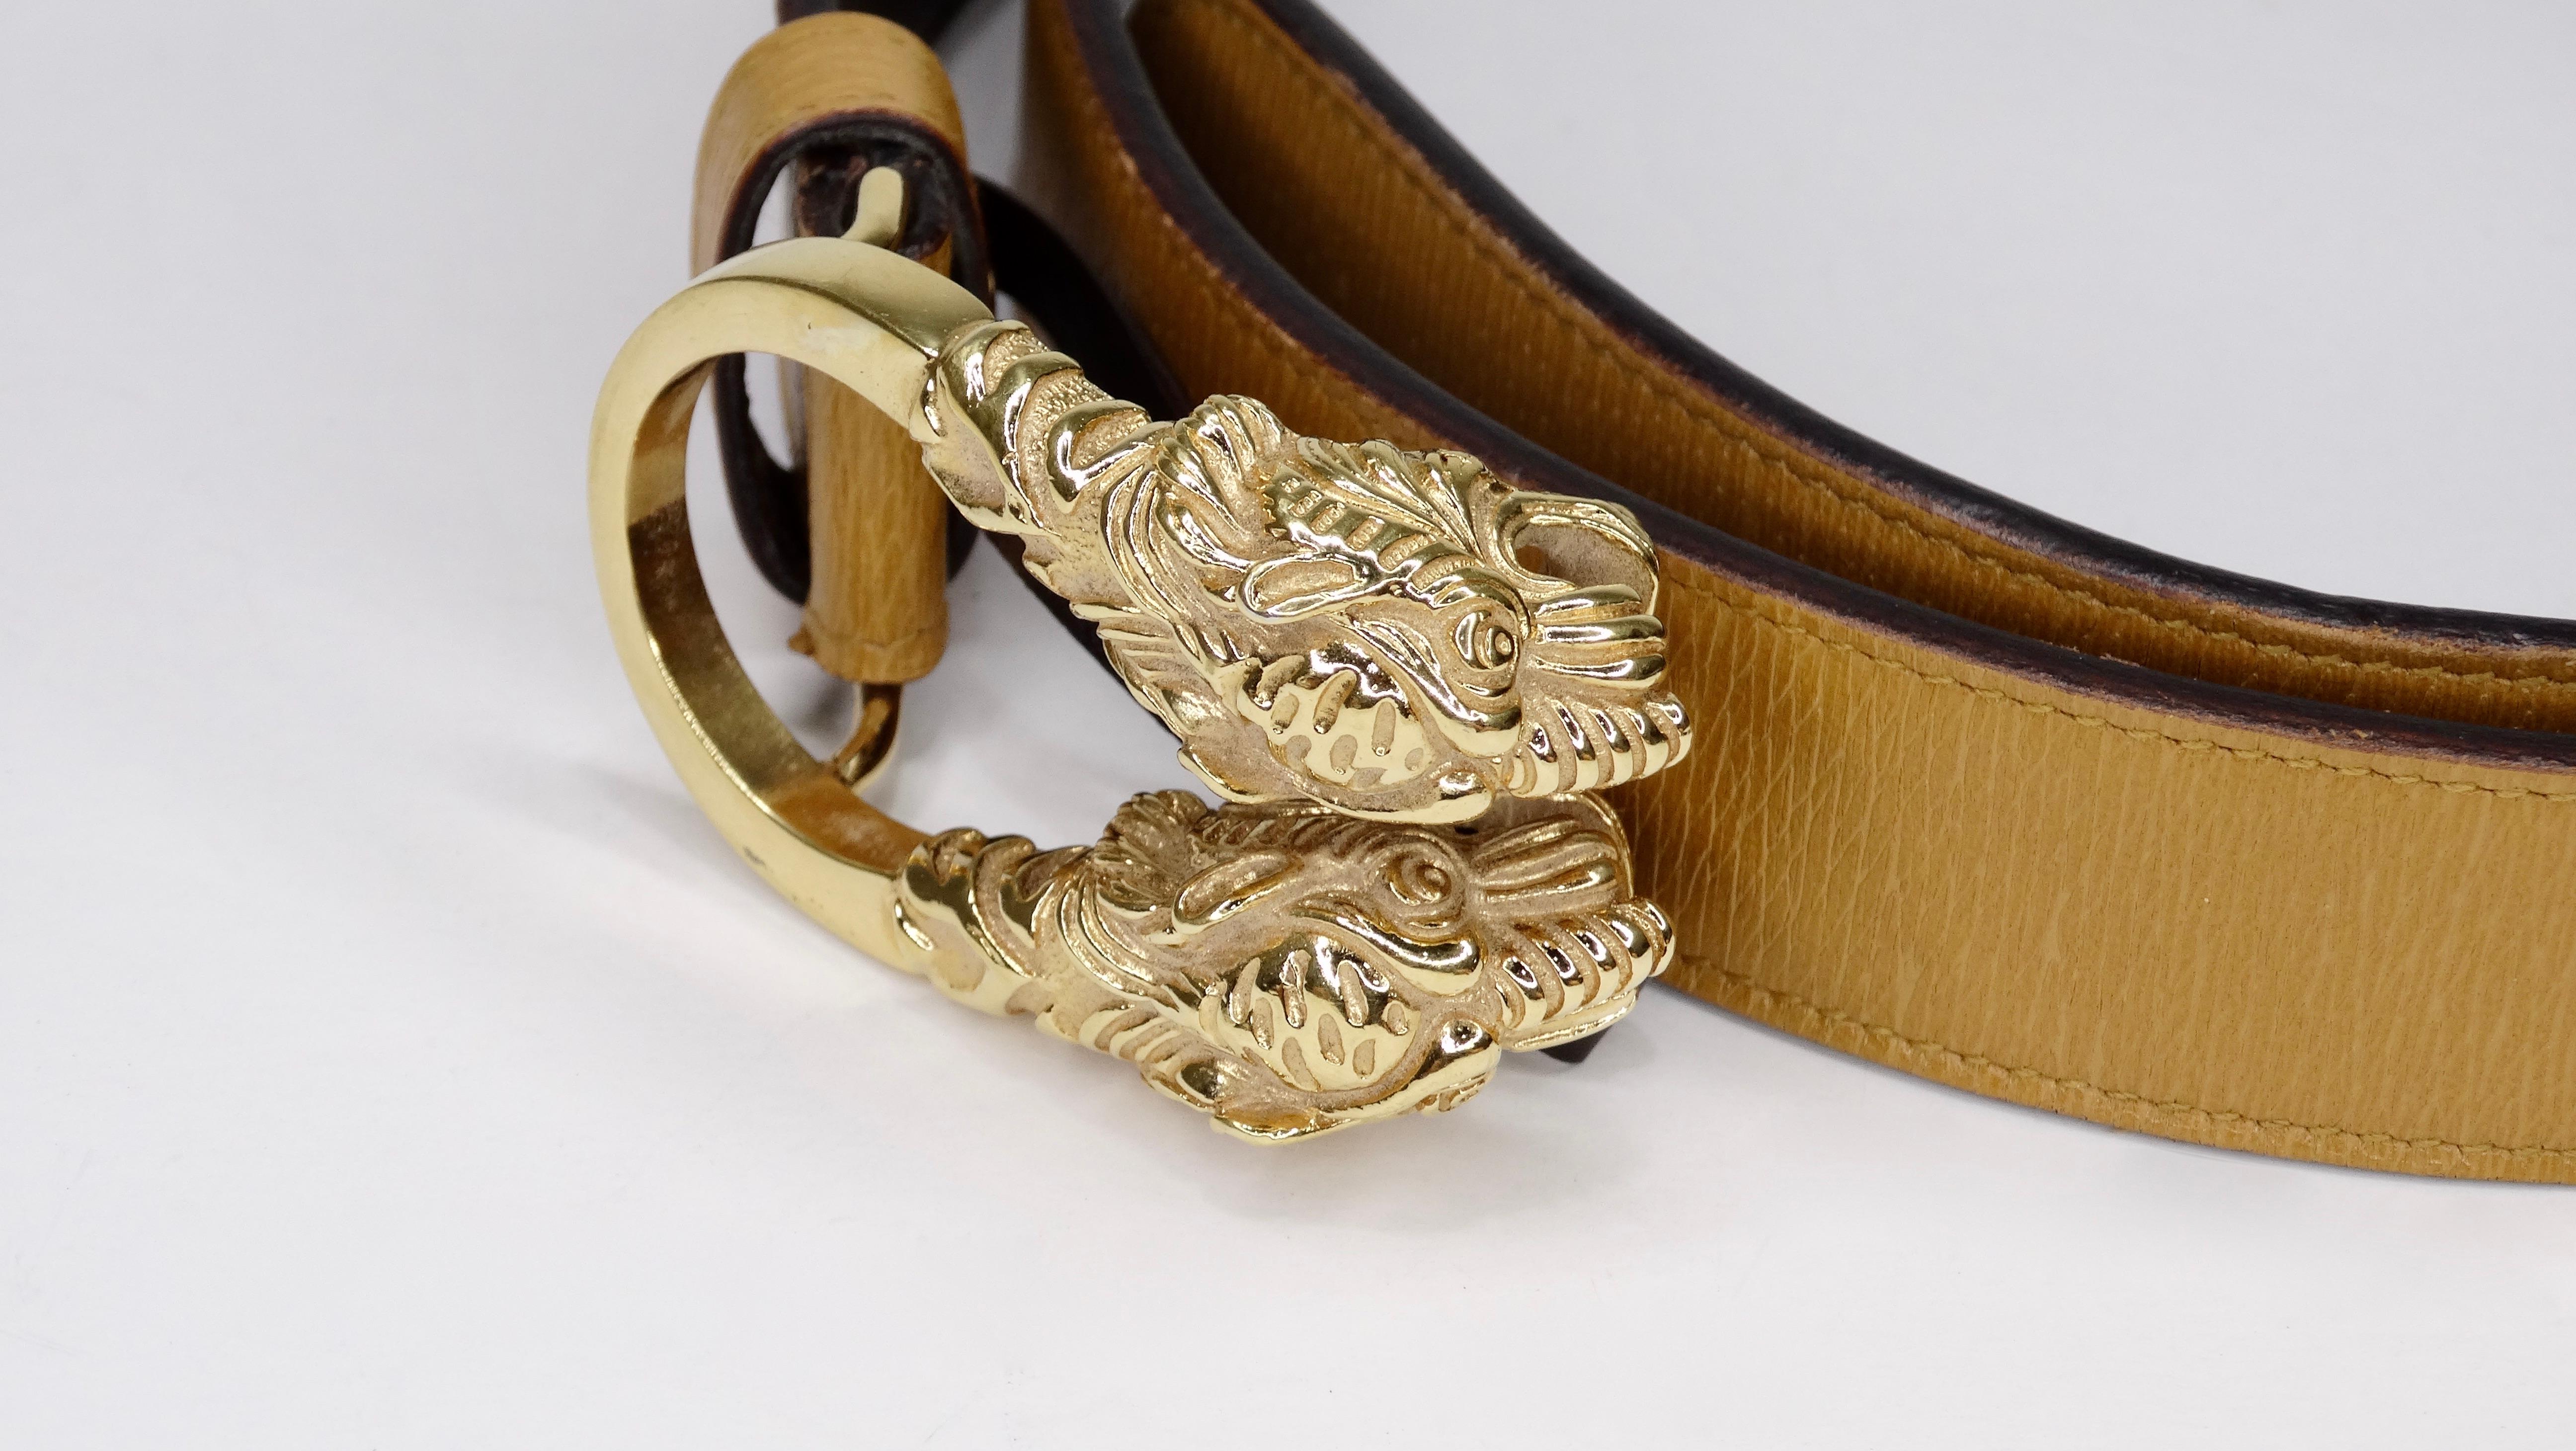 Score yourself a piece of classic Gucci with this amazing belt! Circa 1980s, this light brown leather belt features a Dionysus antiqued gold buckle-a unique detail referencing the Greek god Dionysus, who in myth is said to have crossed the river